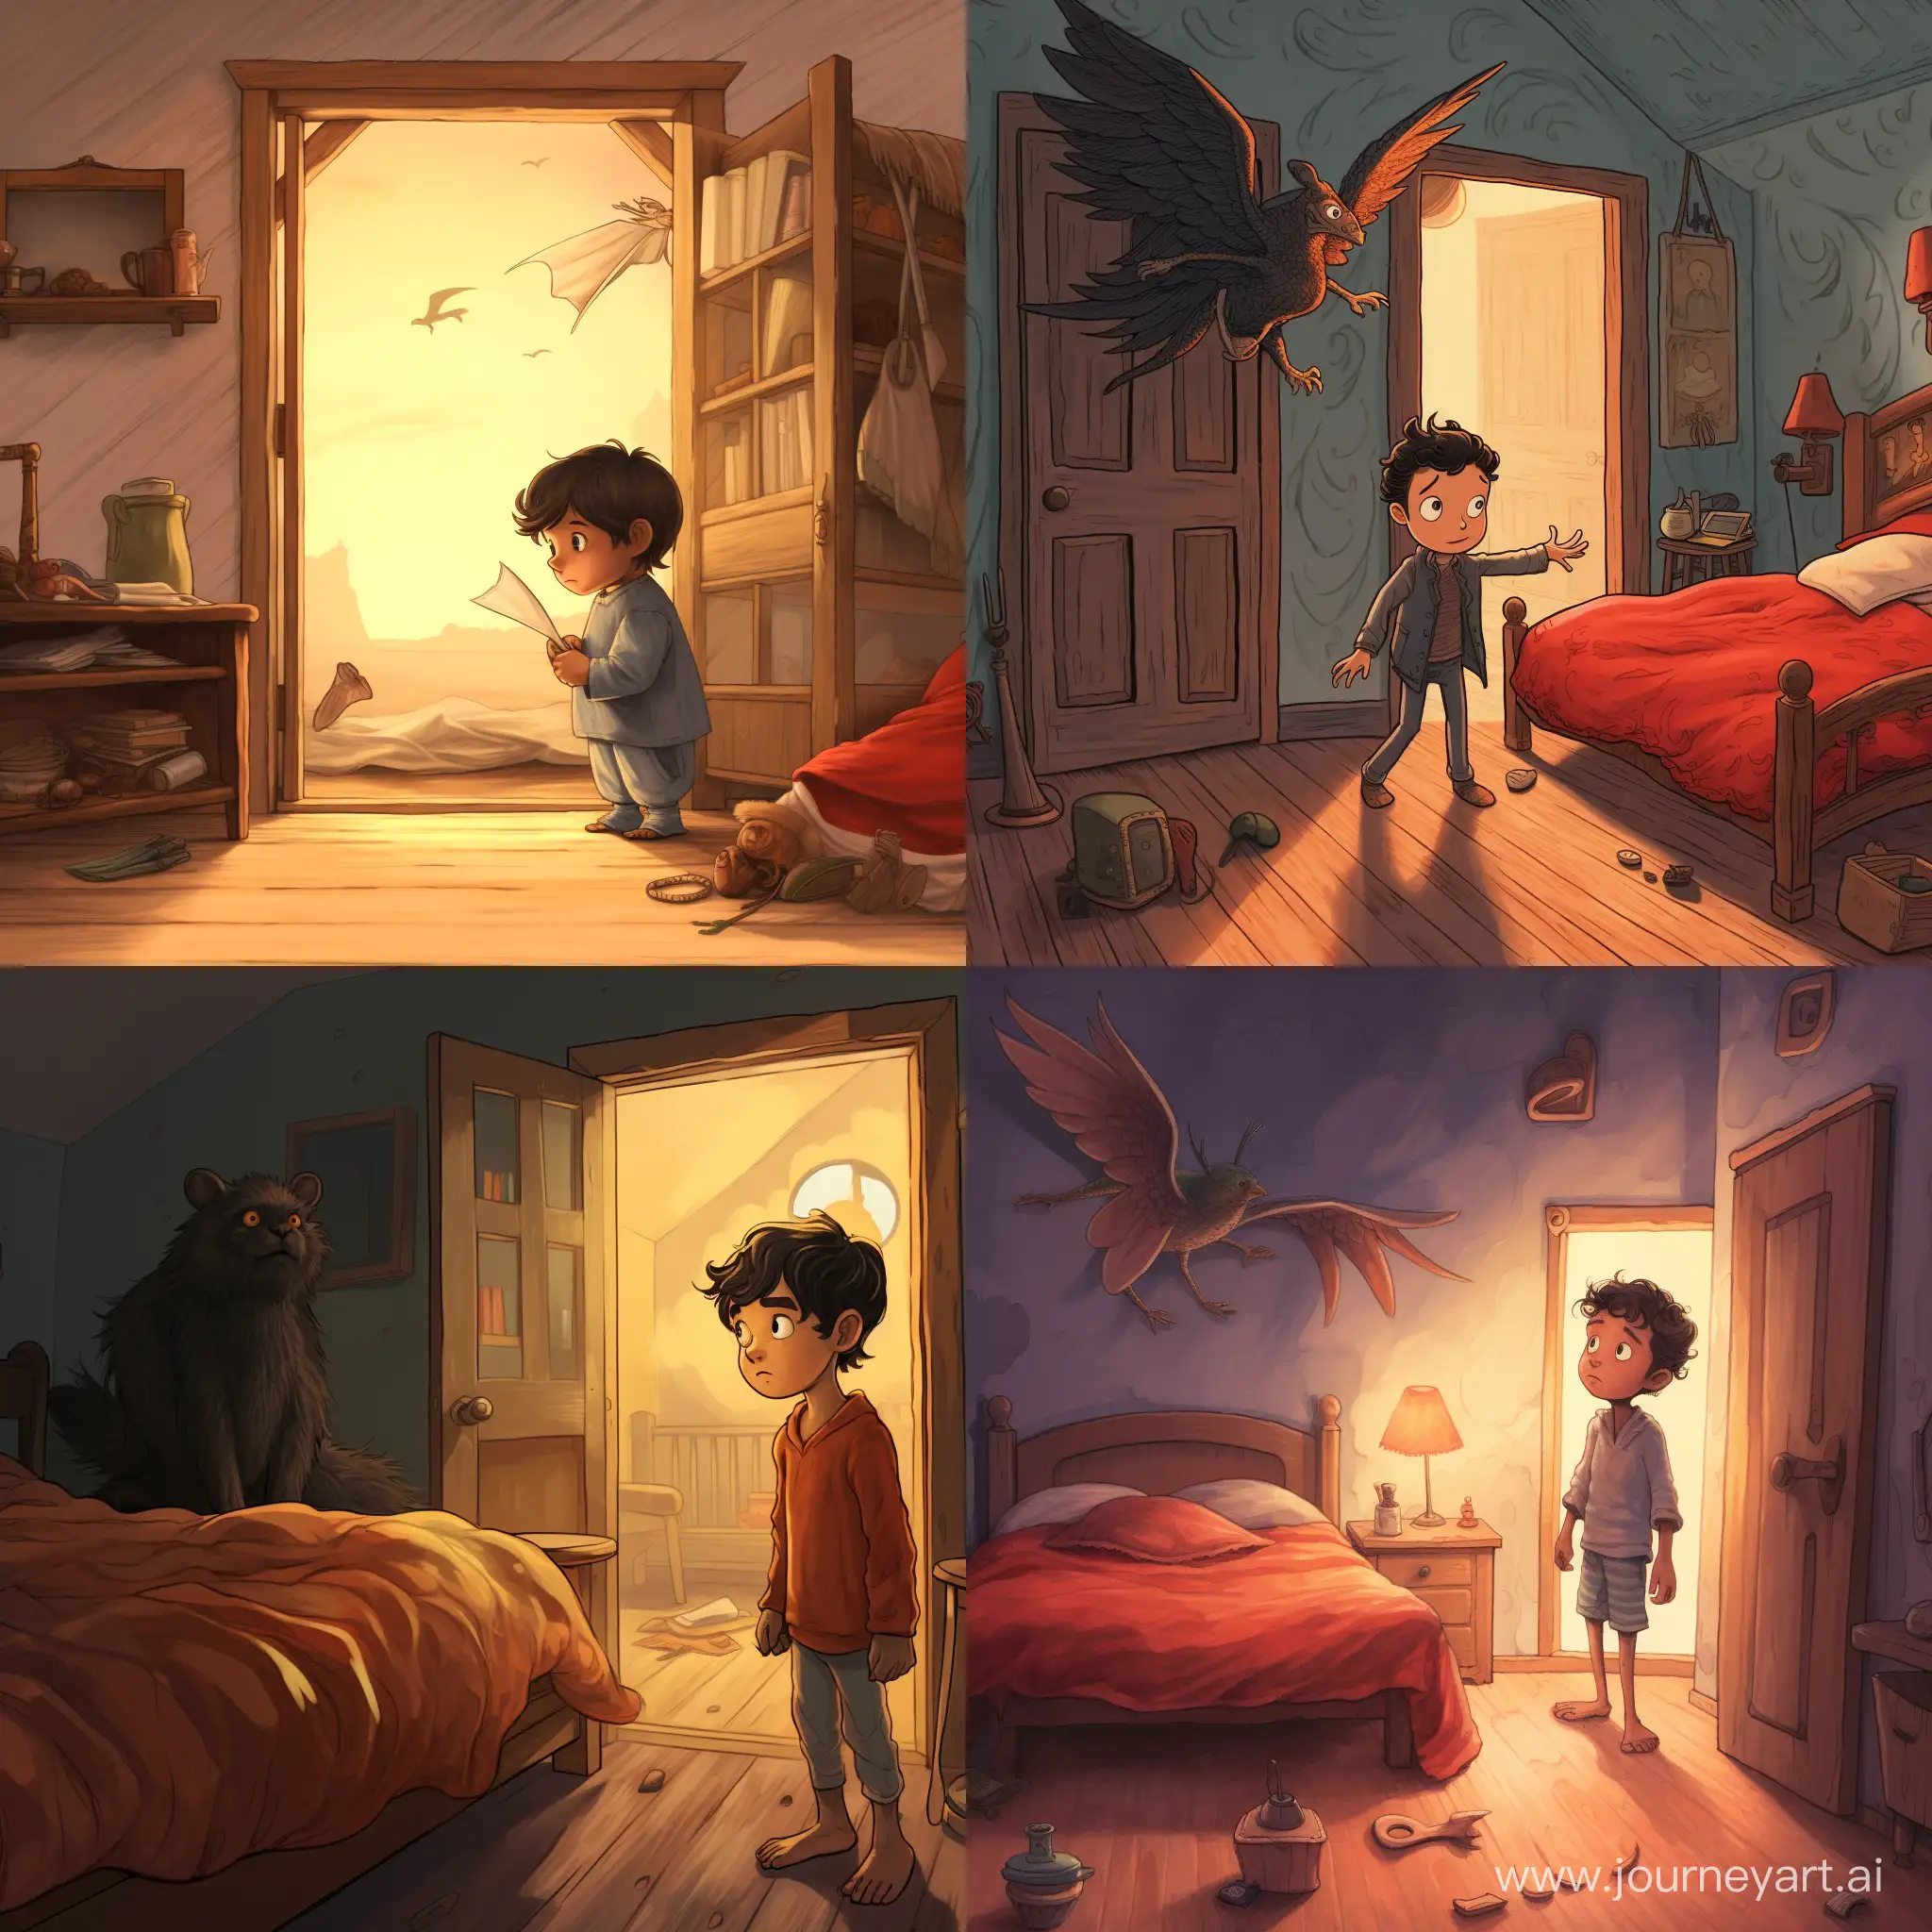 Lucifer-Discovers-Mysterious-Door-in-Room-Storybook-Illustration